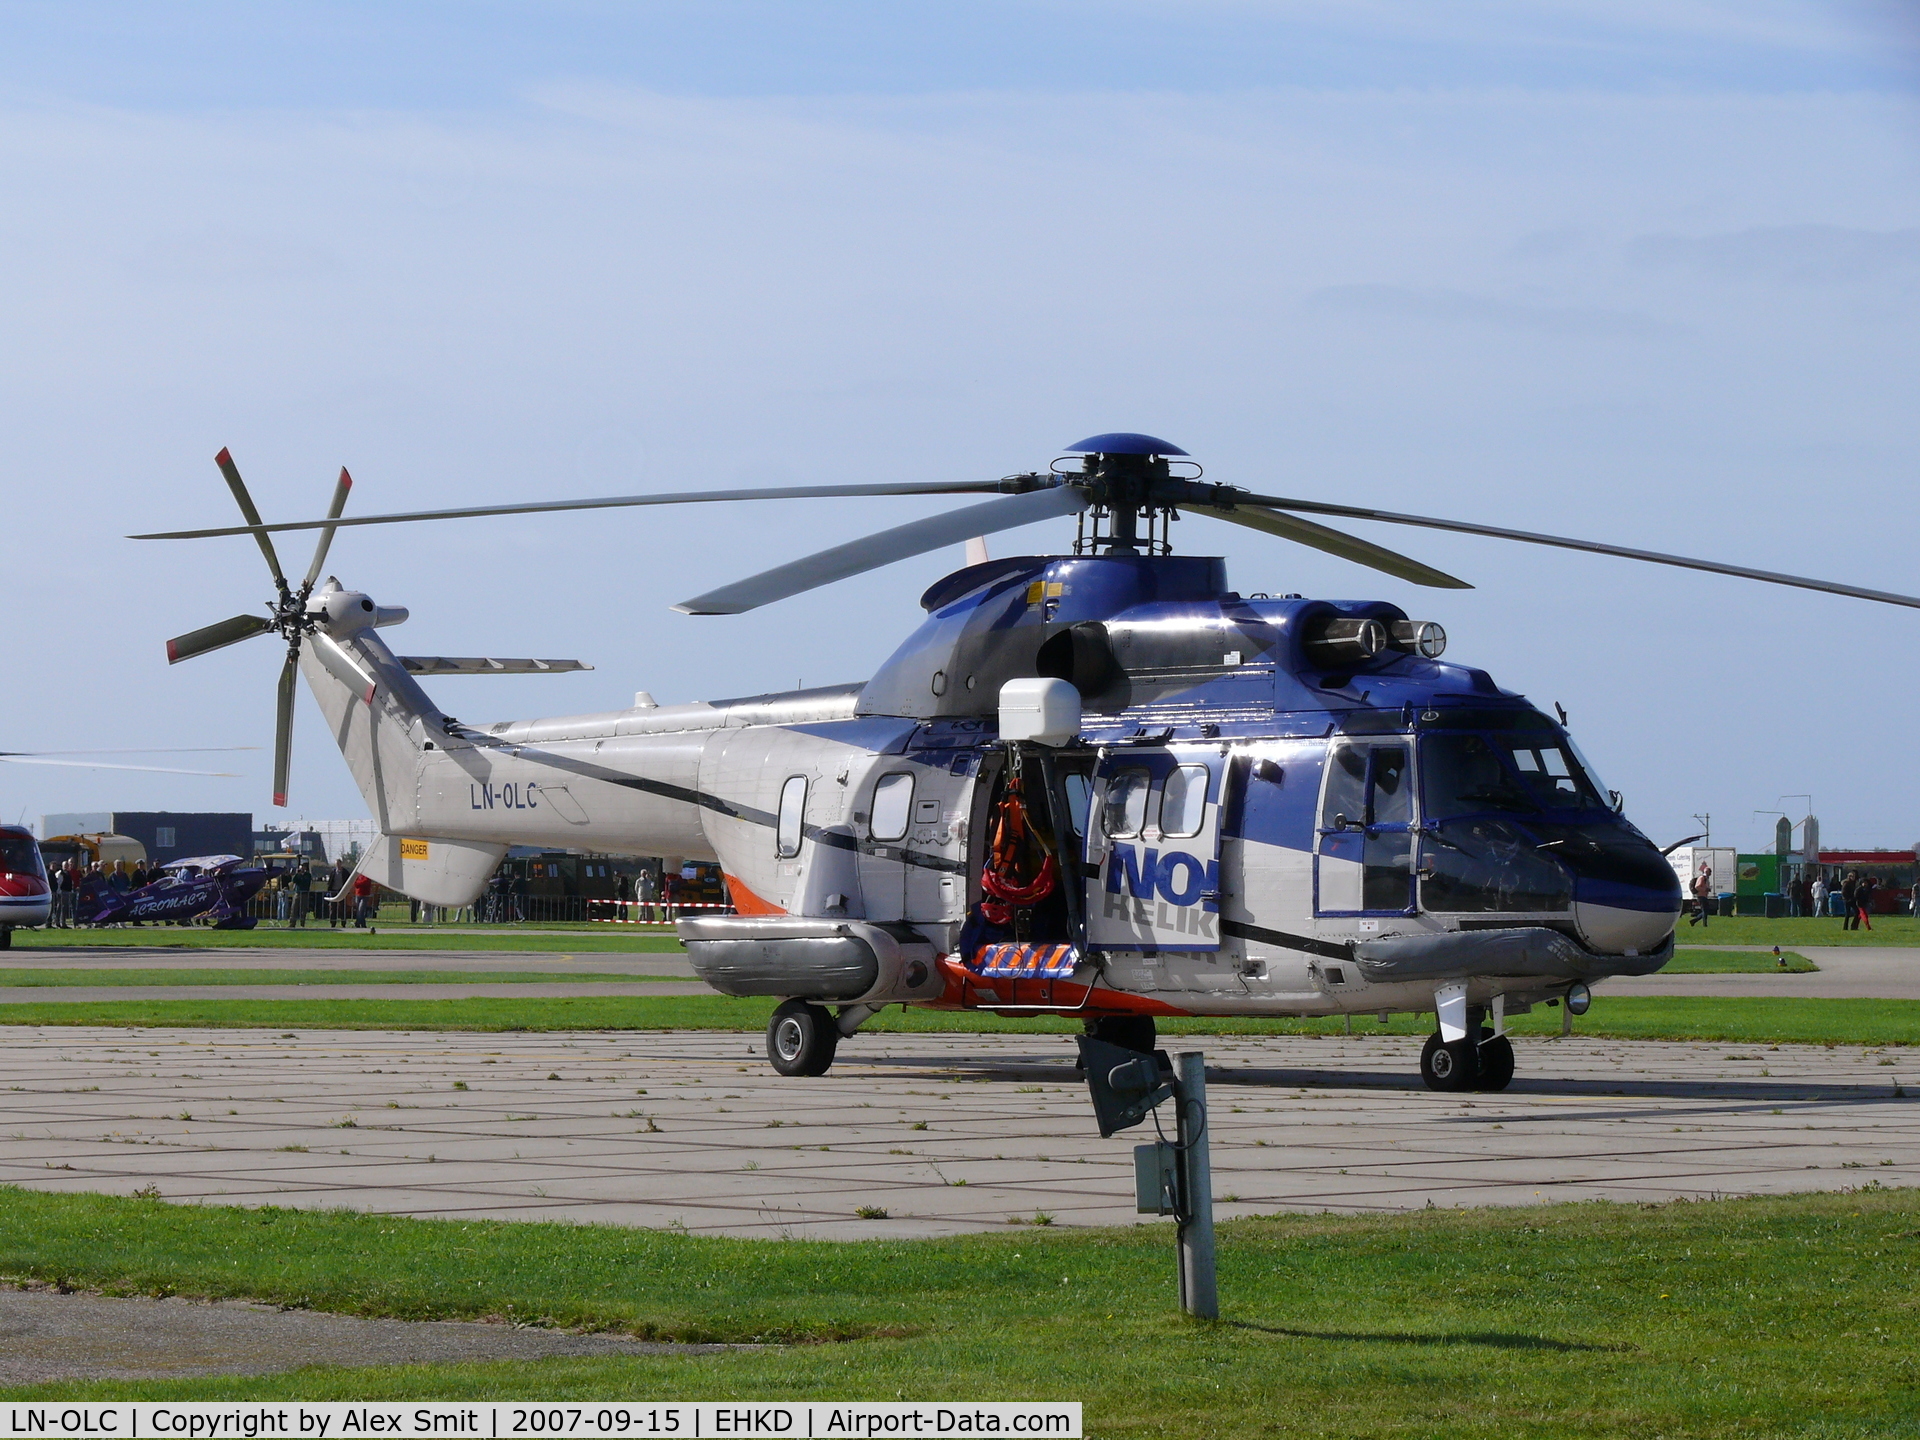 LN-OLC, 1983 Aerospatiale AS-332L Super Puma C/N 2083, Airshow or not, this helo is ready for emergencies at the North Sea